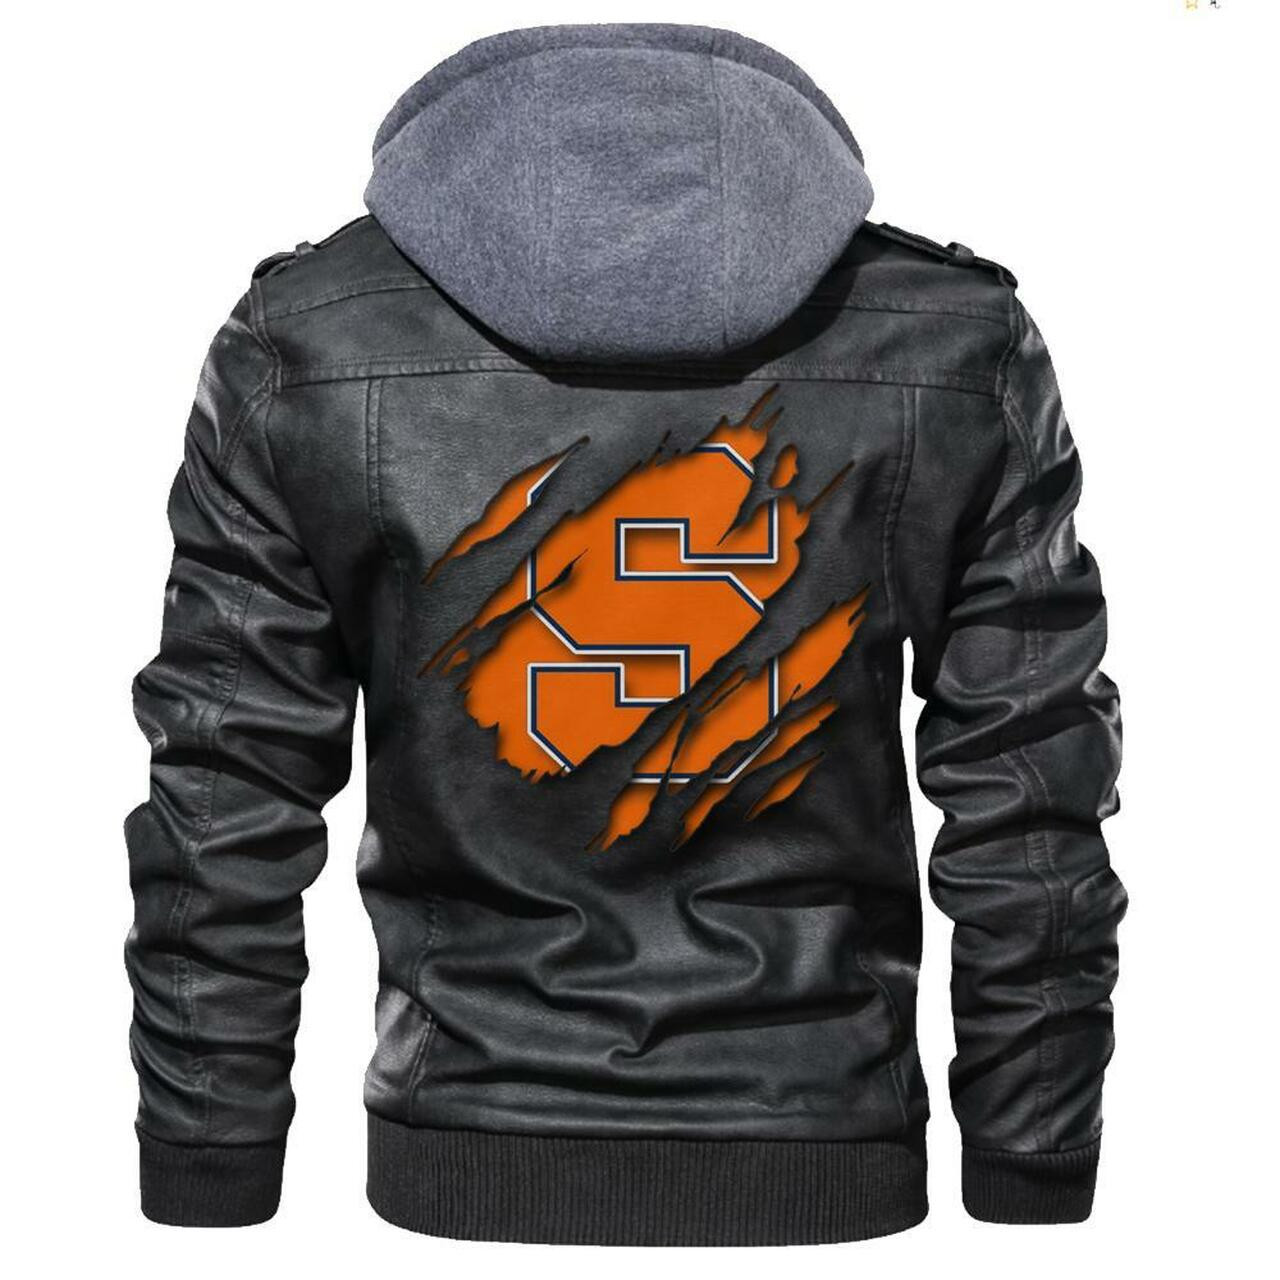 Don't wait another minute, Get Hot Leather Jacket today 113